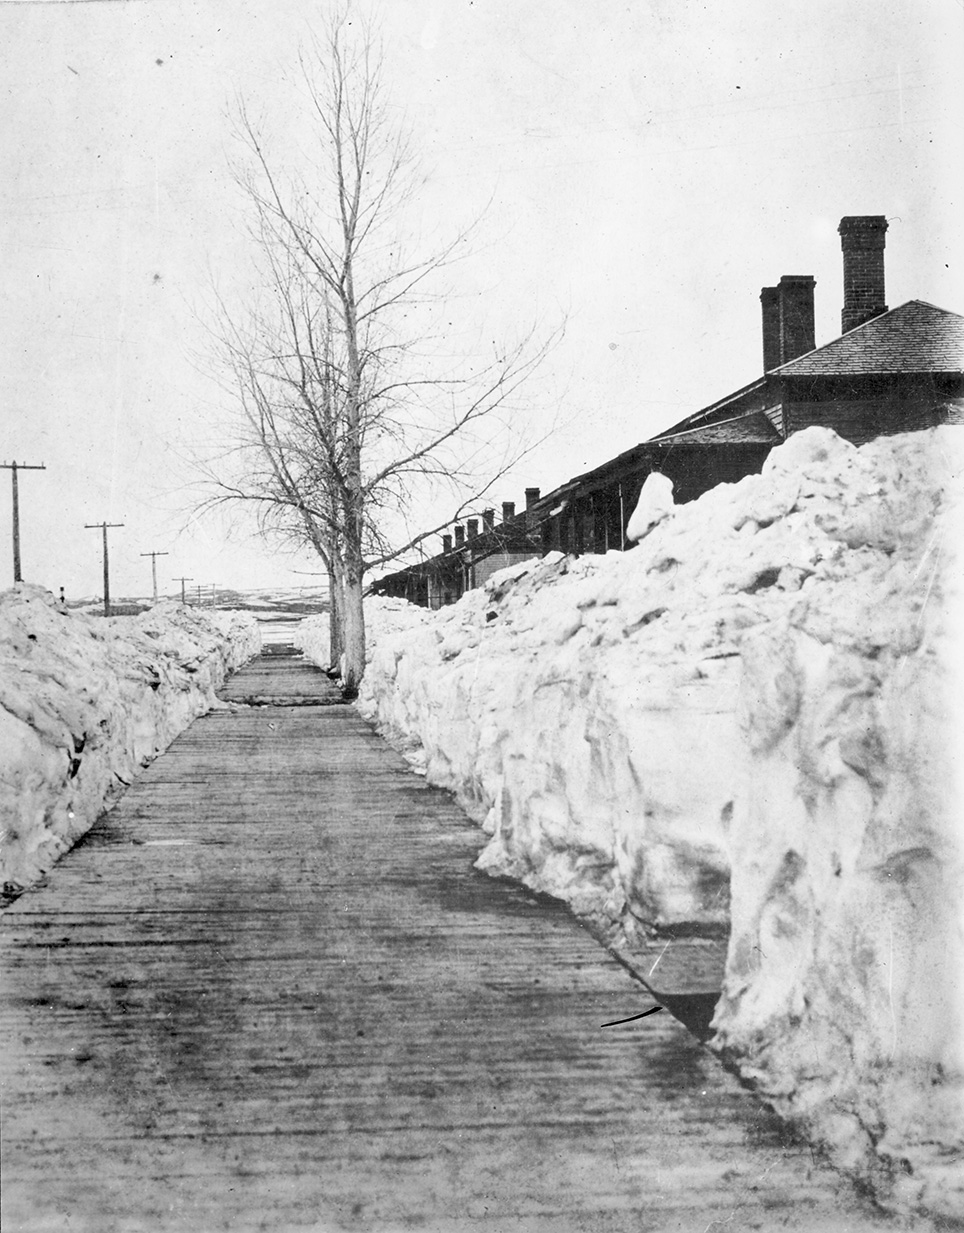 Officers' quarters in winter, Fort Buford